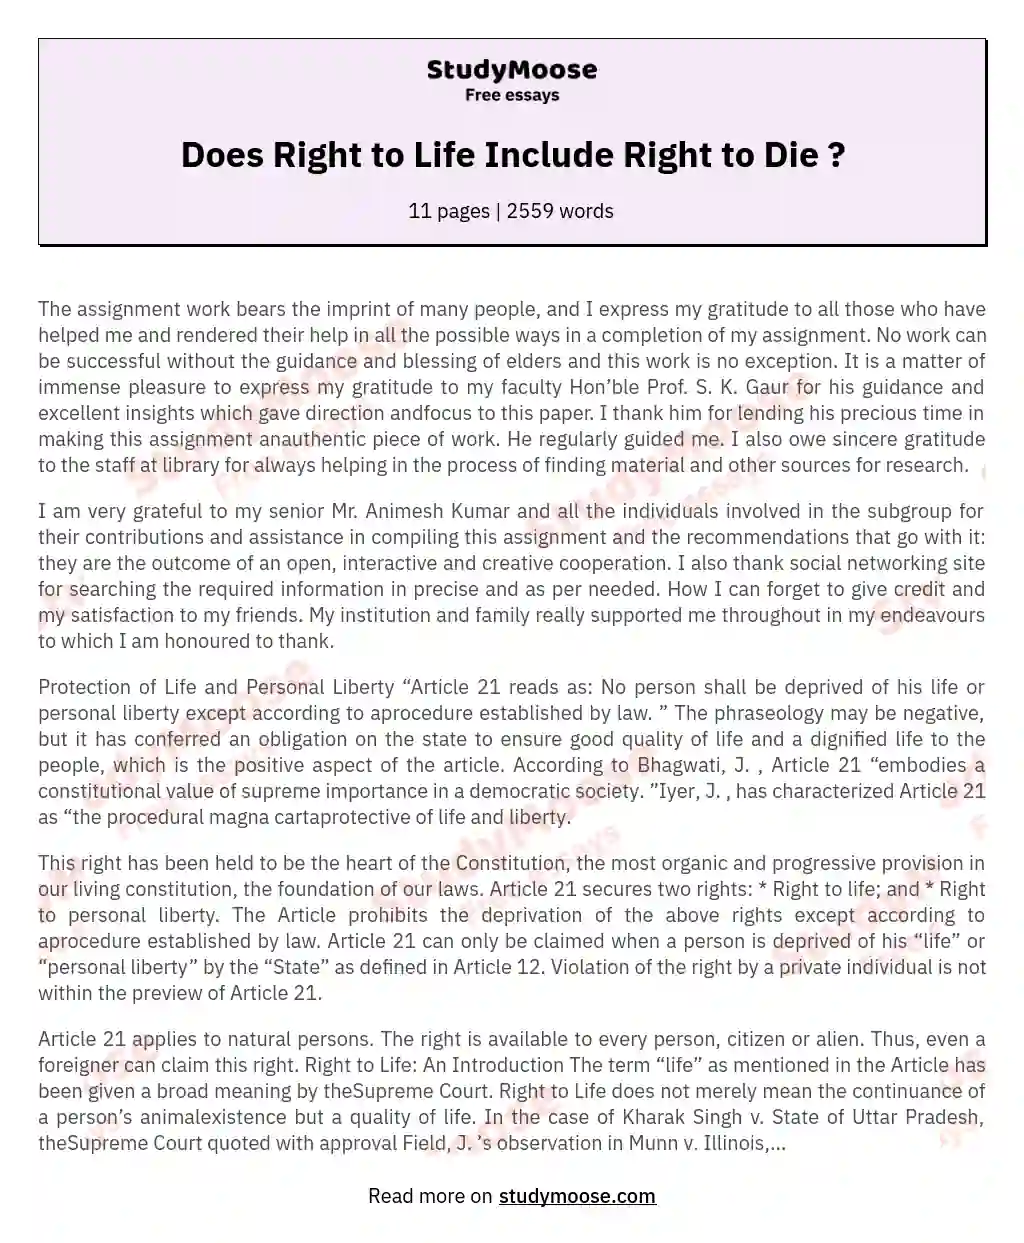 Does Right to Life Include Right to Die ?